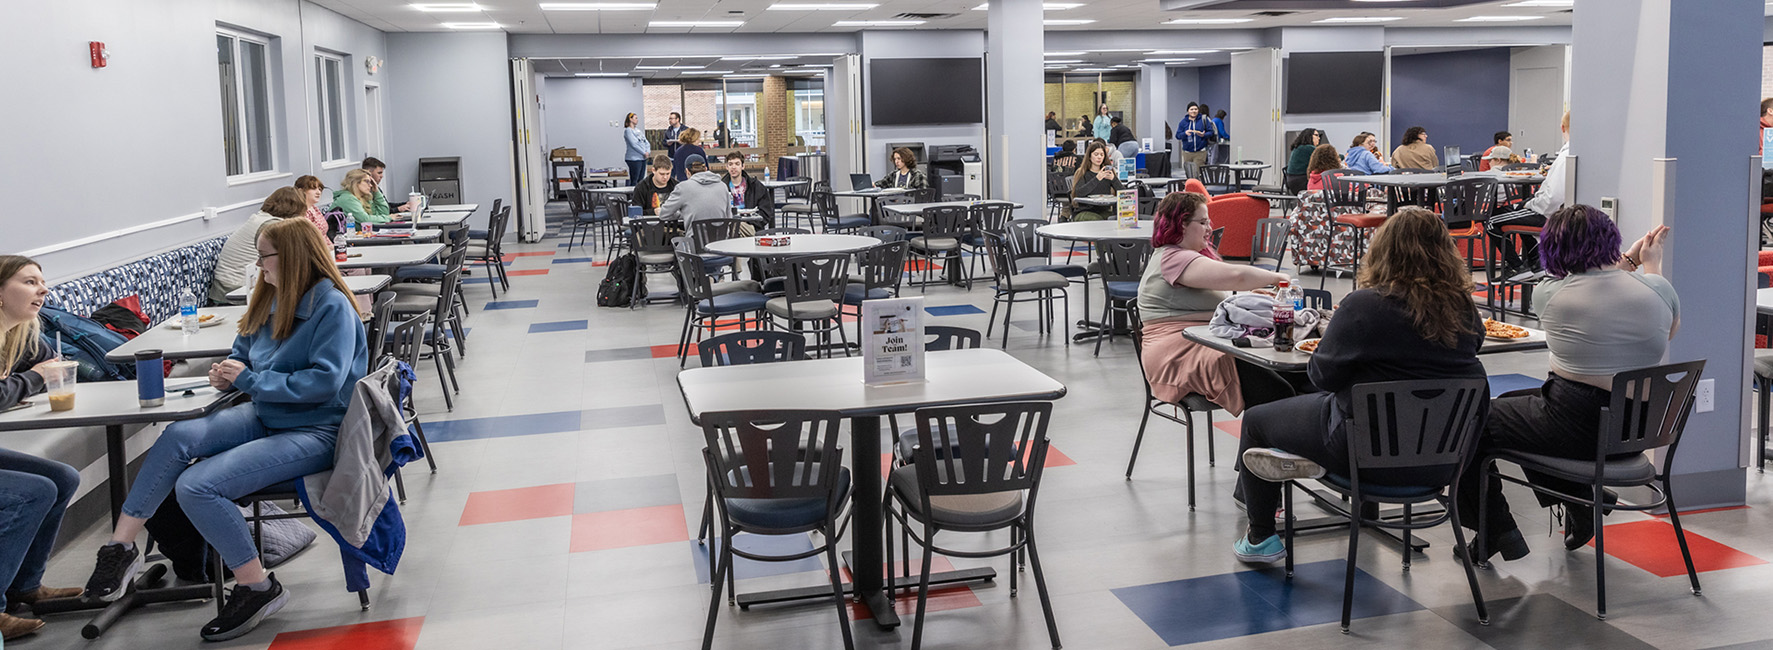 students in the Galllatin Campus cafeteria